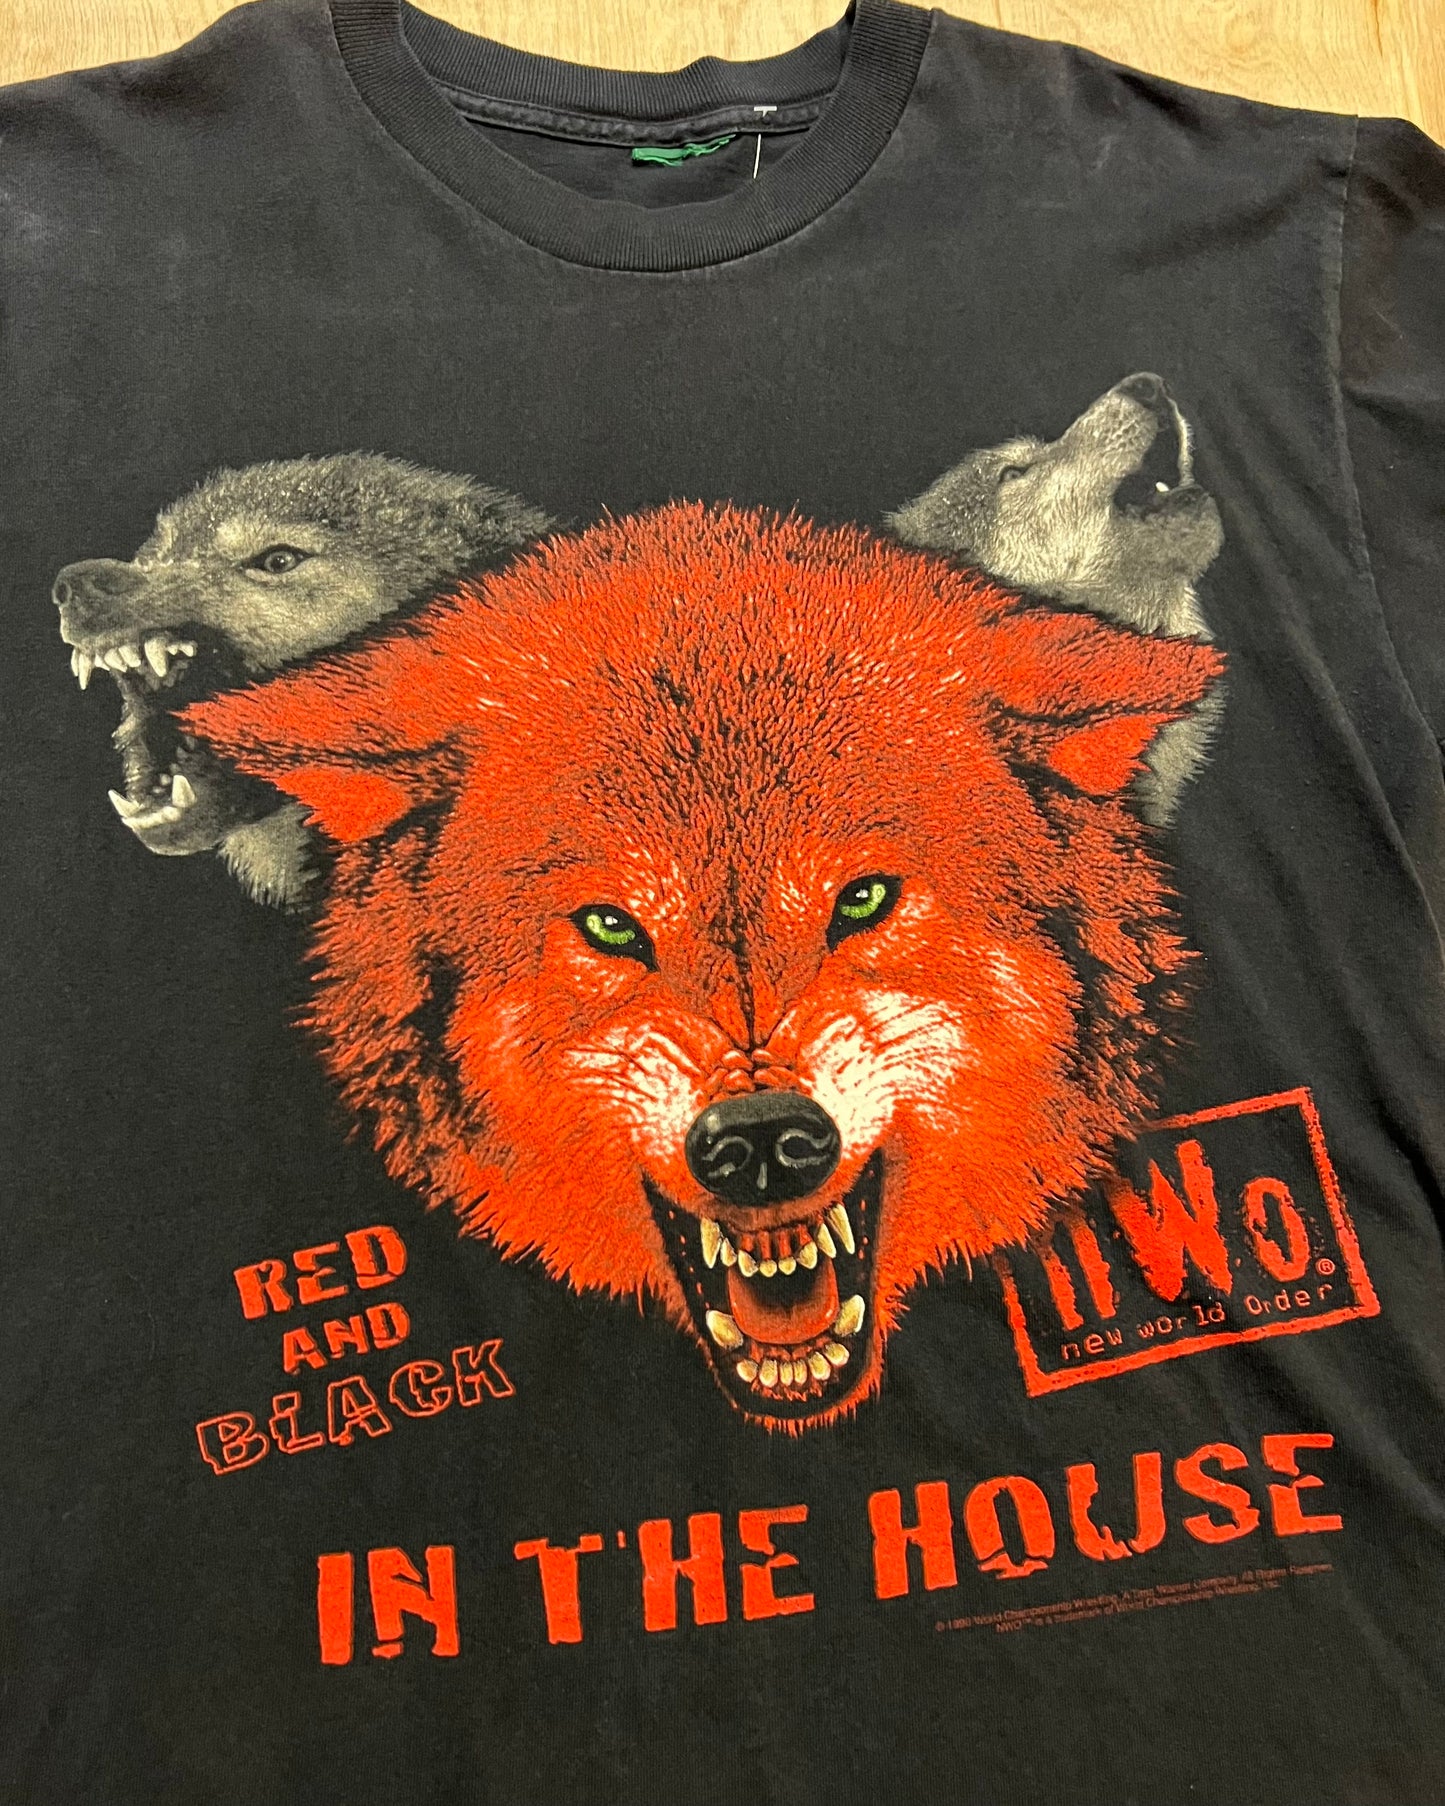 1998 New World Order "In the House" Wresting T-Shirt